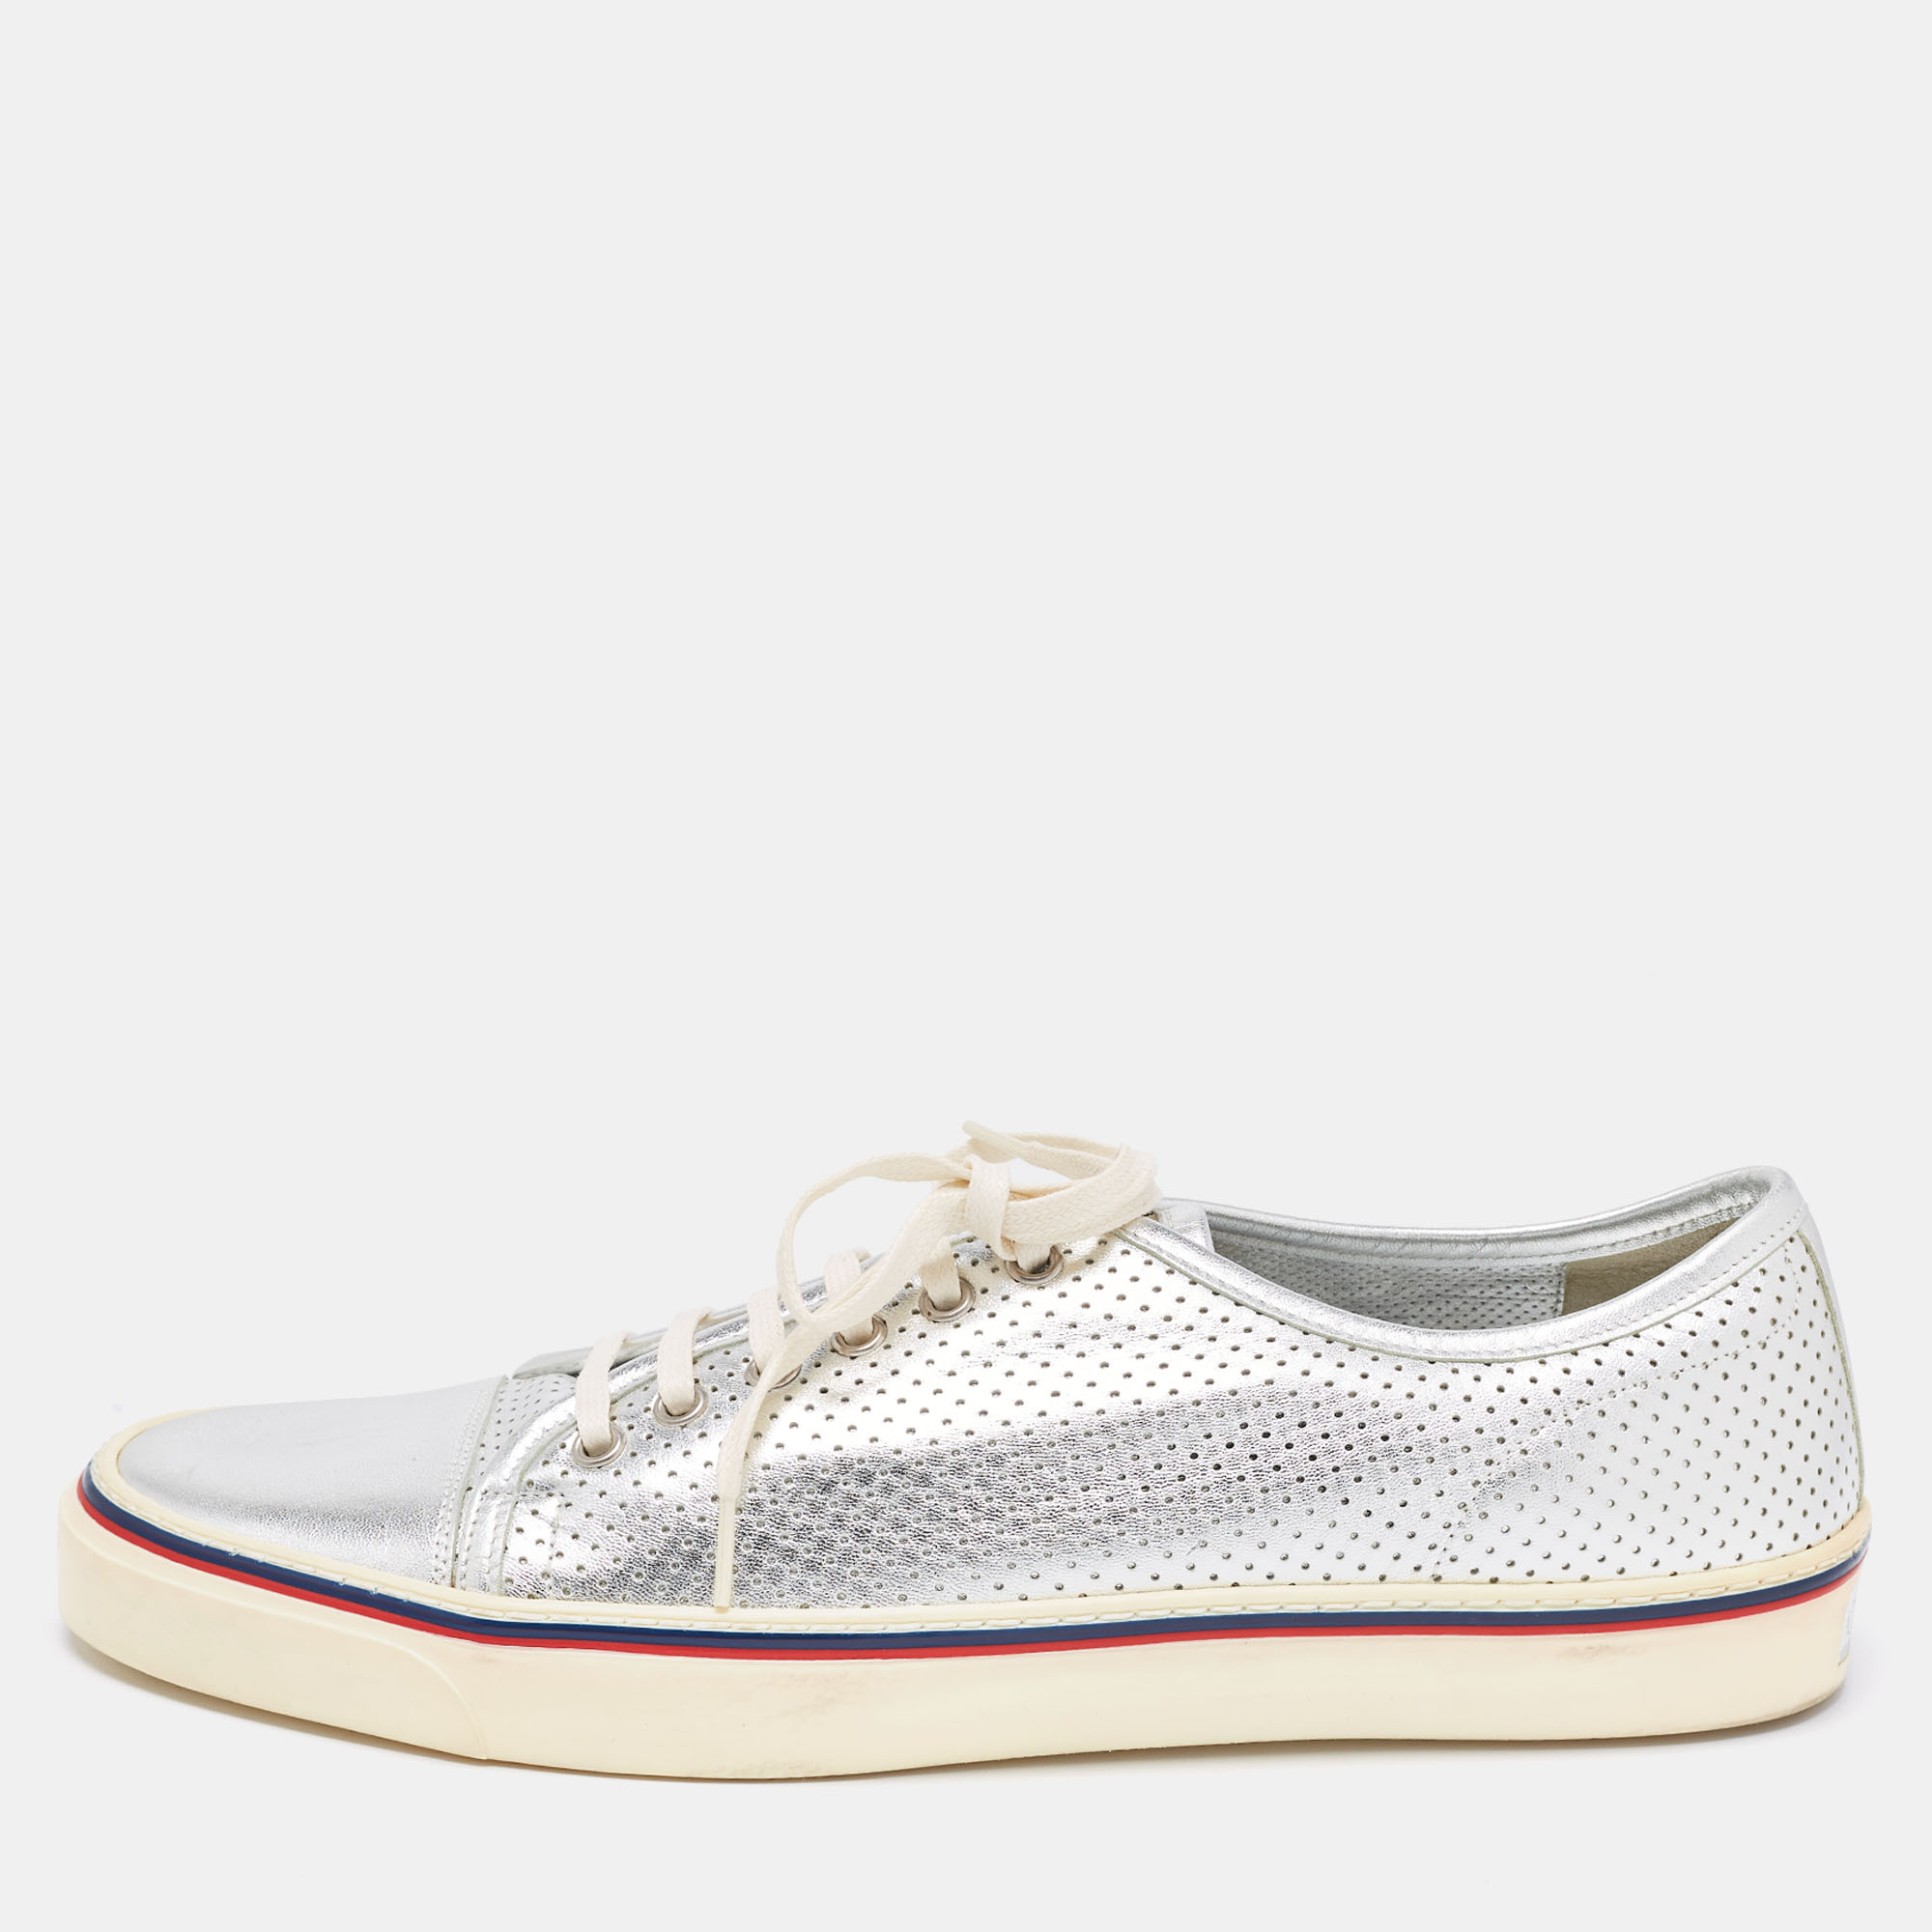 Gucci silver perforated leather low top sneakers size 44.5